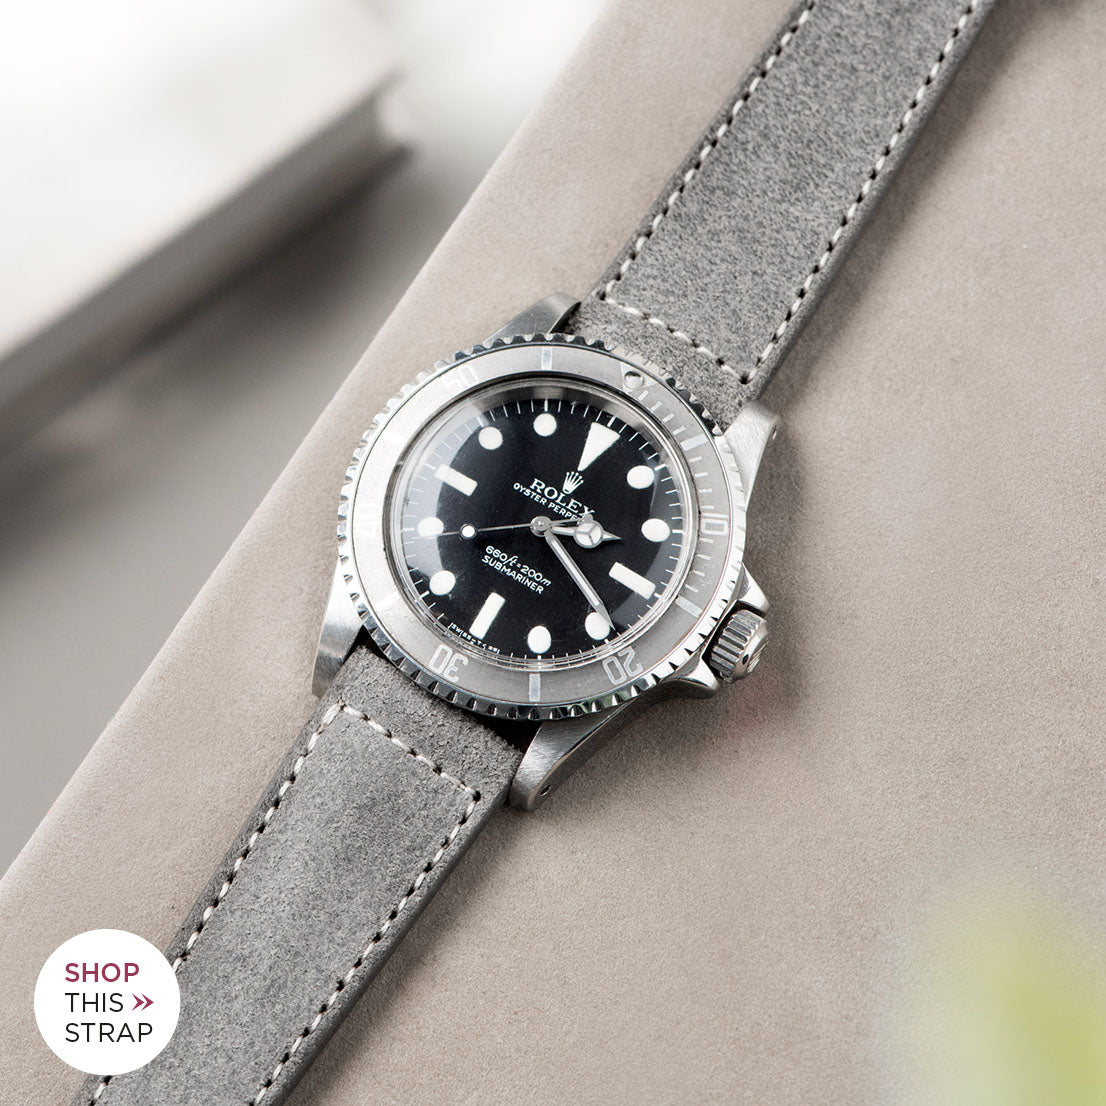 Bulang and Sons_Strap Guide_The Rolex 5513 Faded Maxi Submariner_Rugged Grey Boxed Stitch Leather Watch Strap